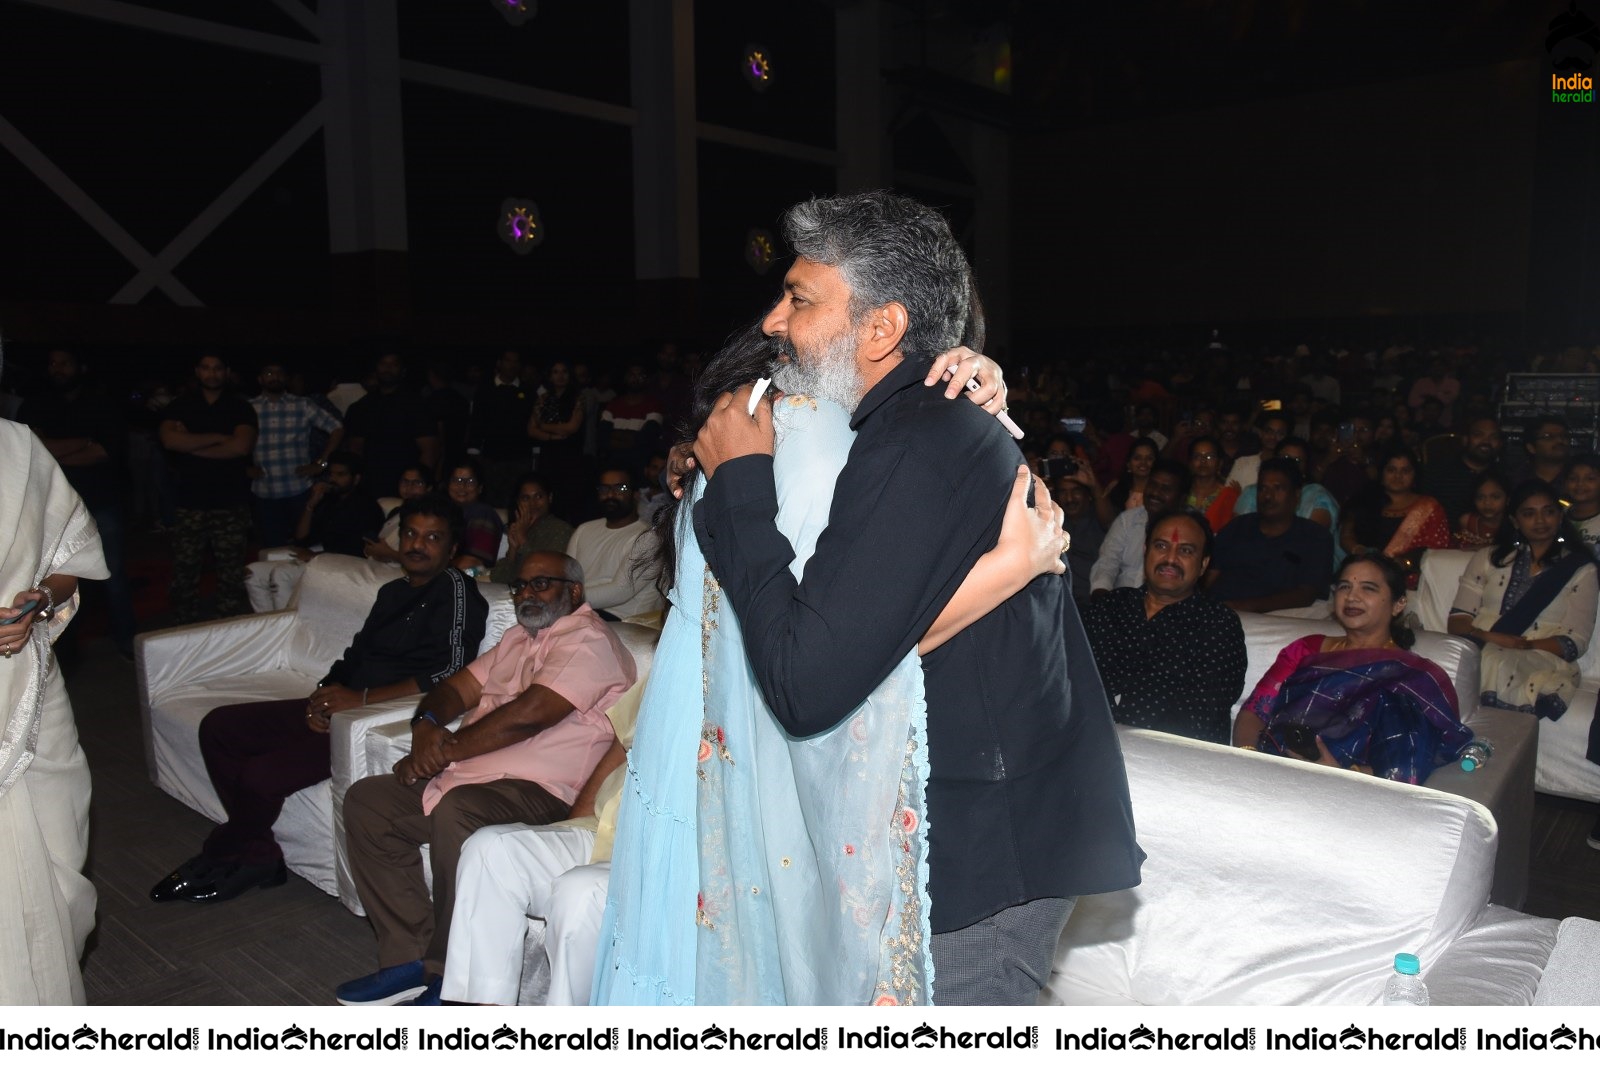 Director SS Rajamouli spotted with Anushka Shetty